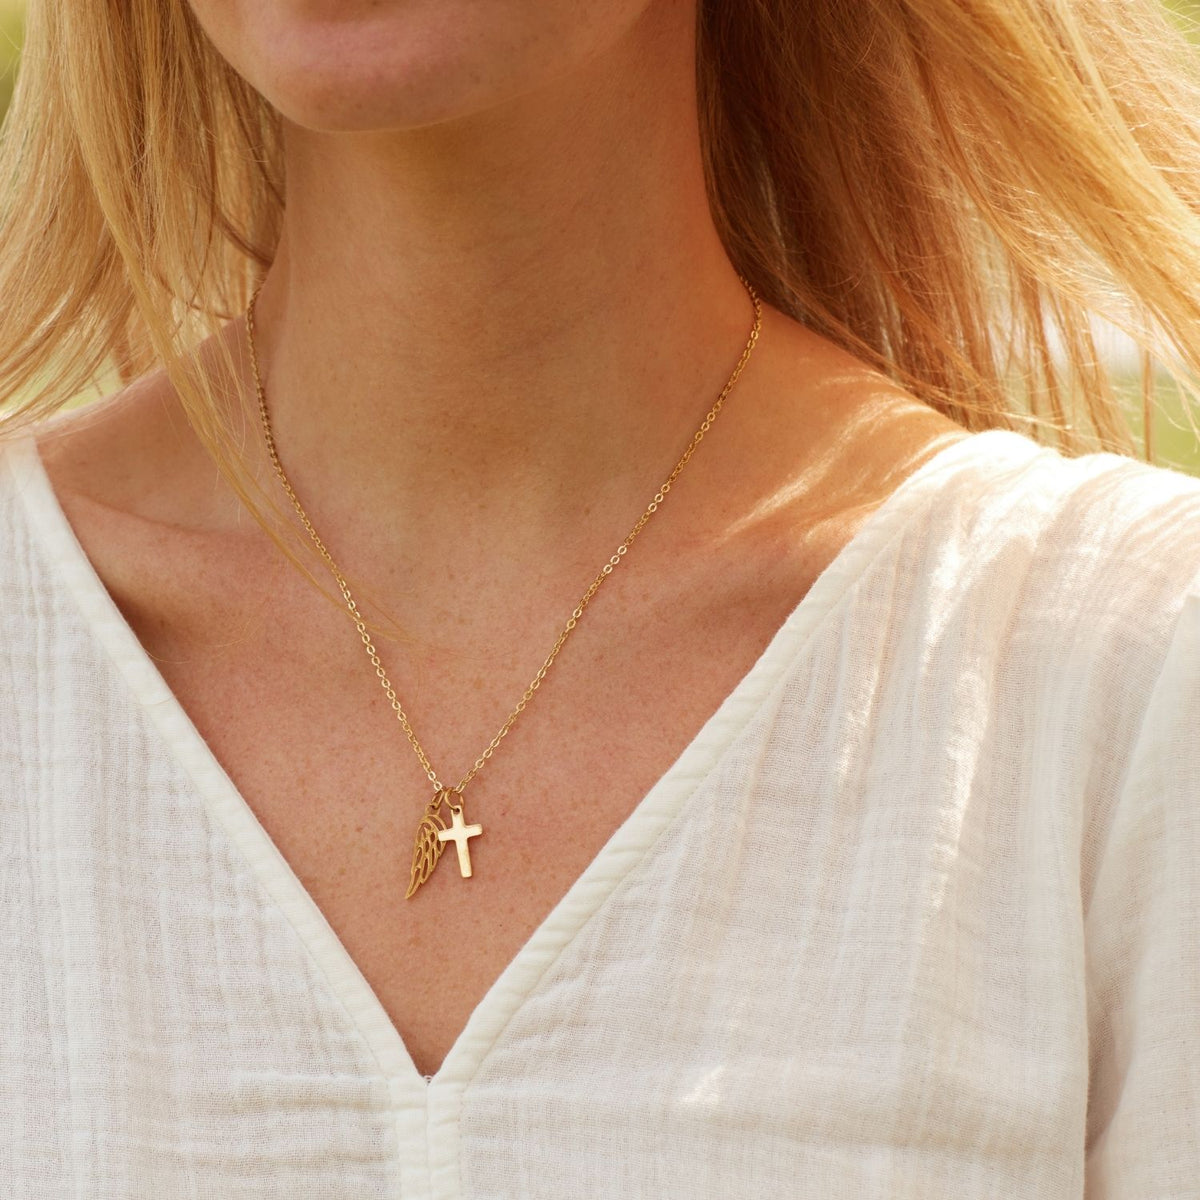 Gift for Cancer Inspiration | God Grant to the Heart of a Warrior | Cross Necklace